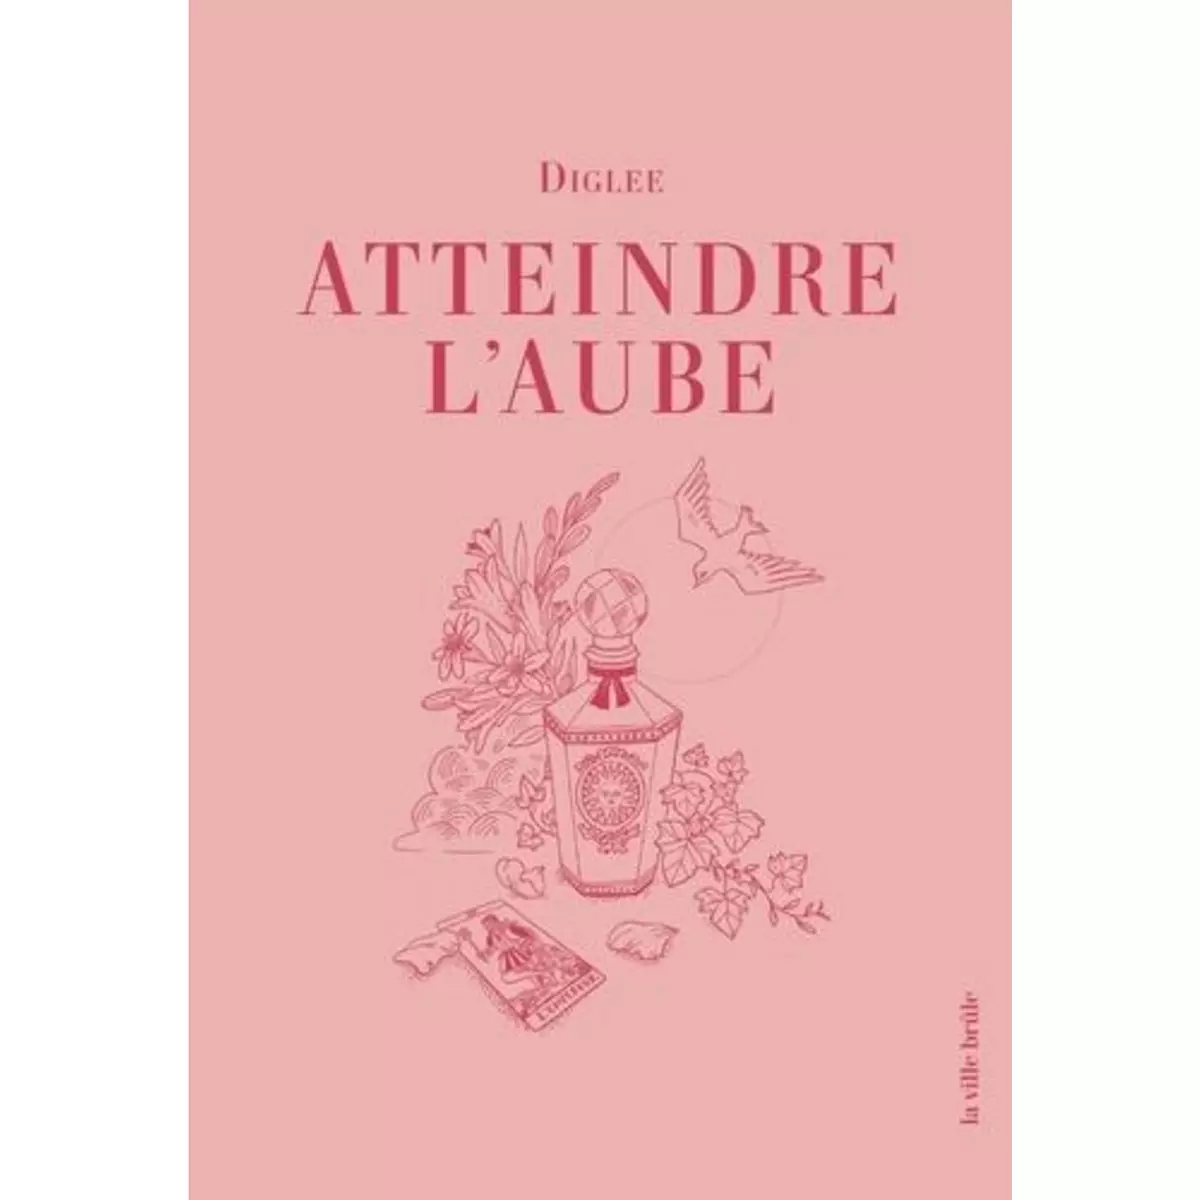  ATTEINDRE L'AUBE, Diglee